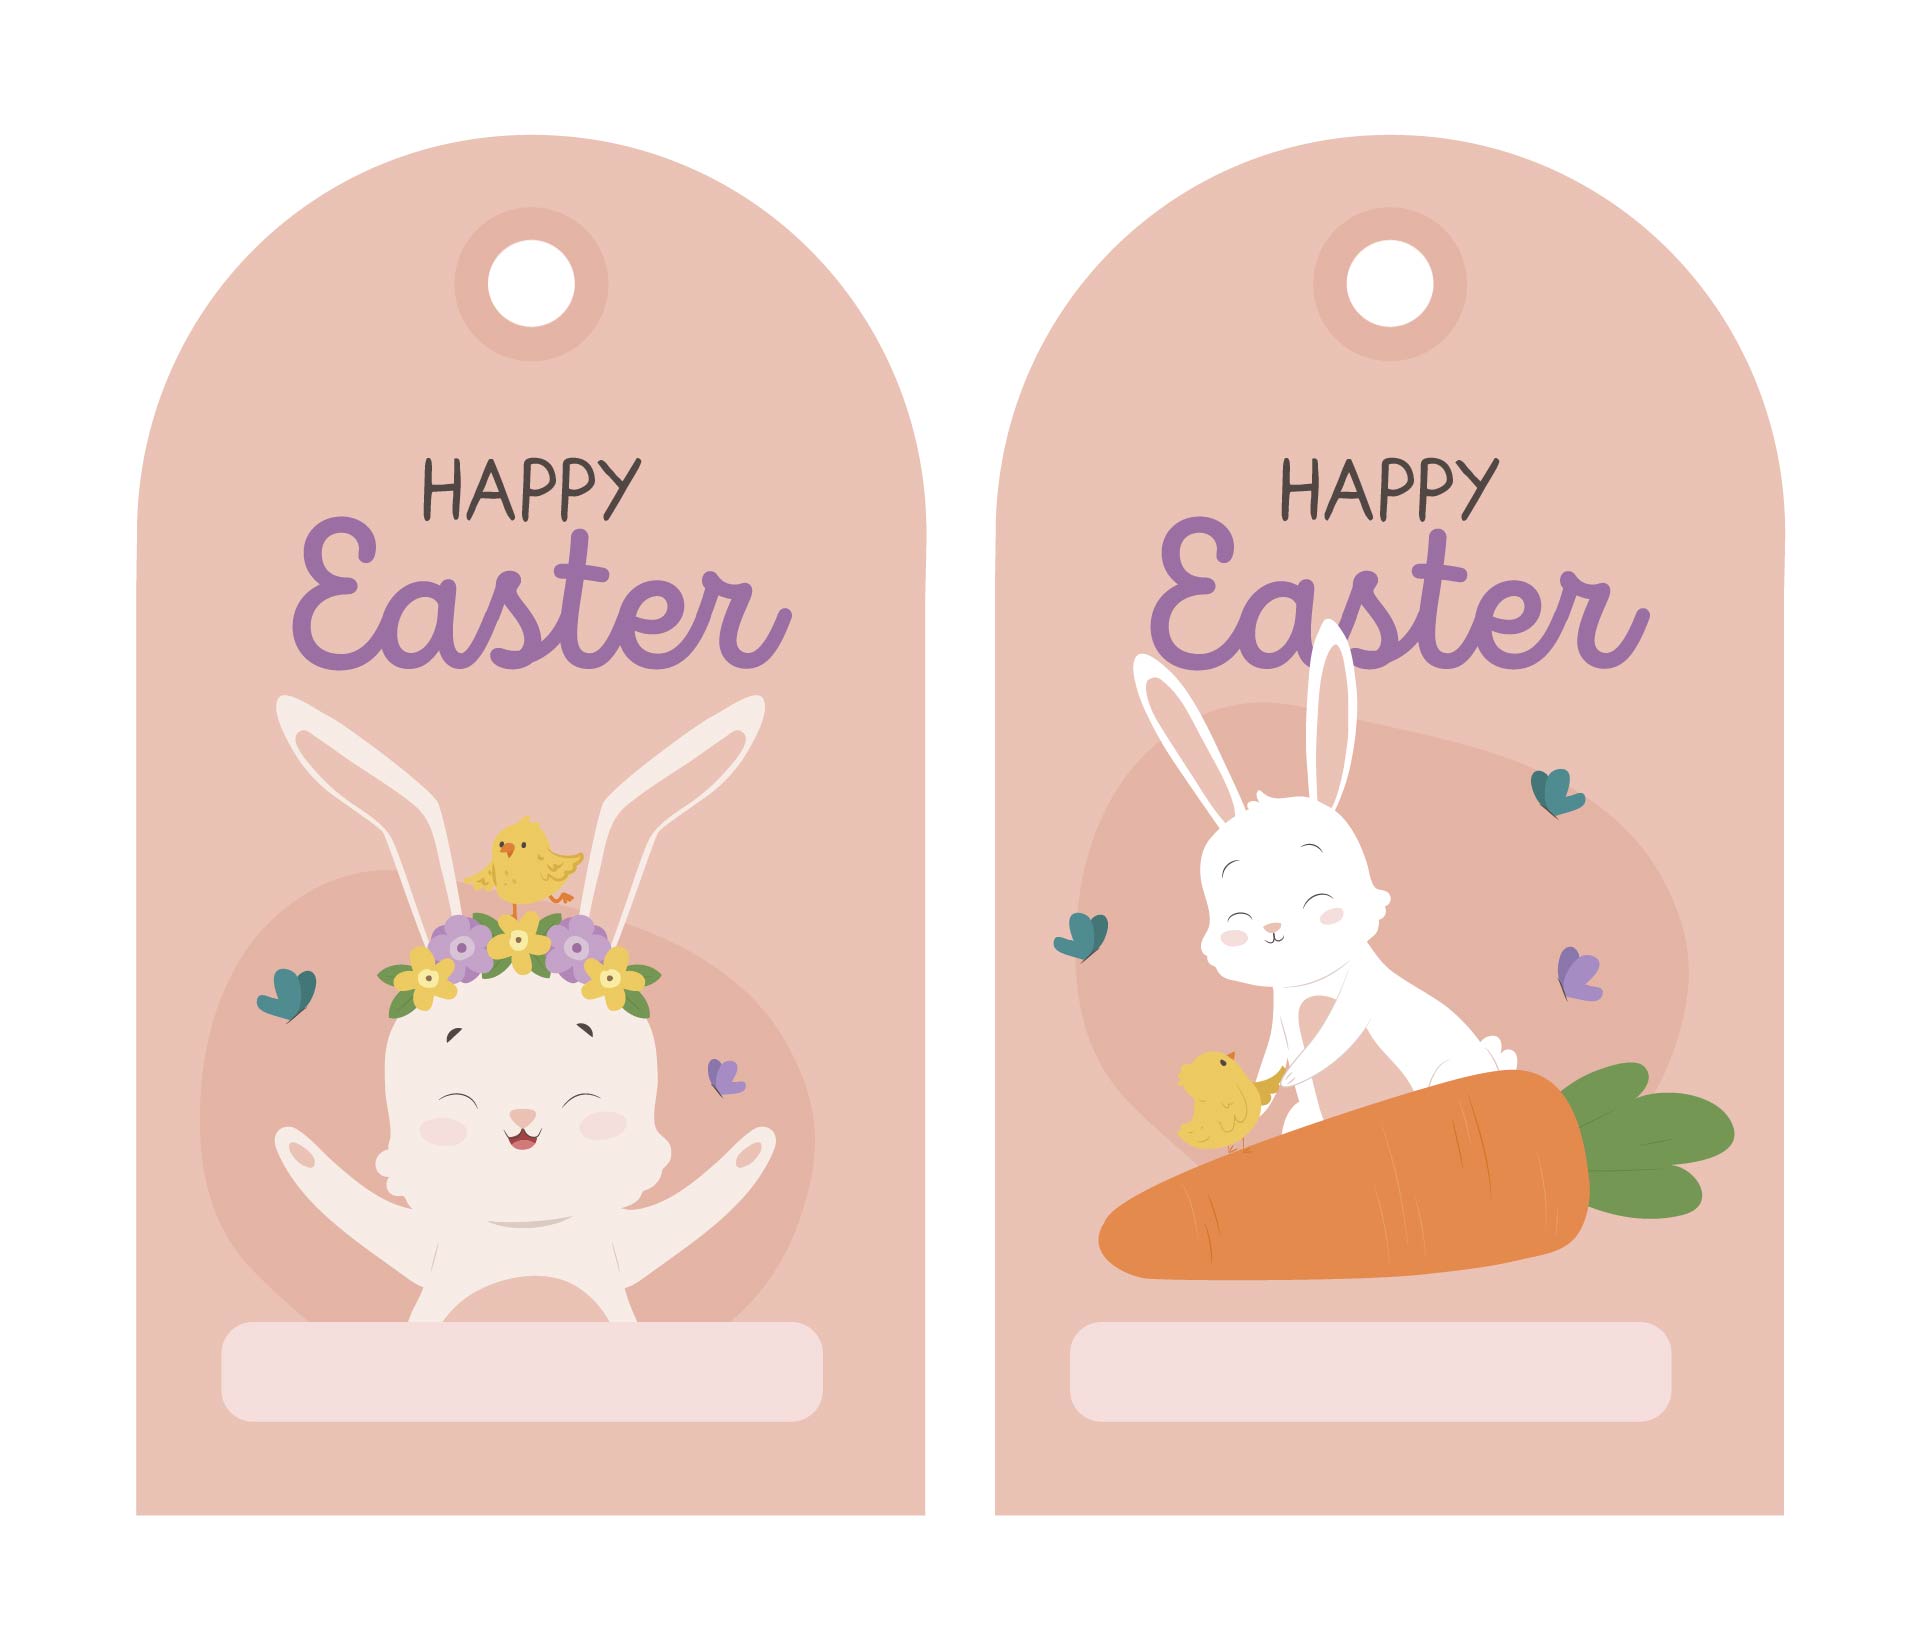 6-best-images-of-happy-easter-tag-free-printable-happy-easter-gift